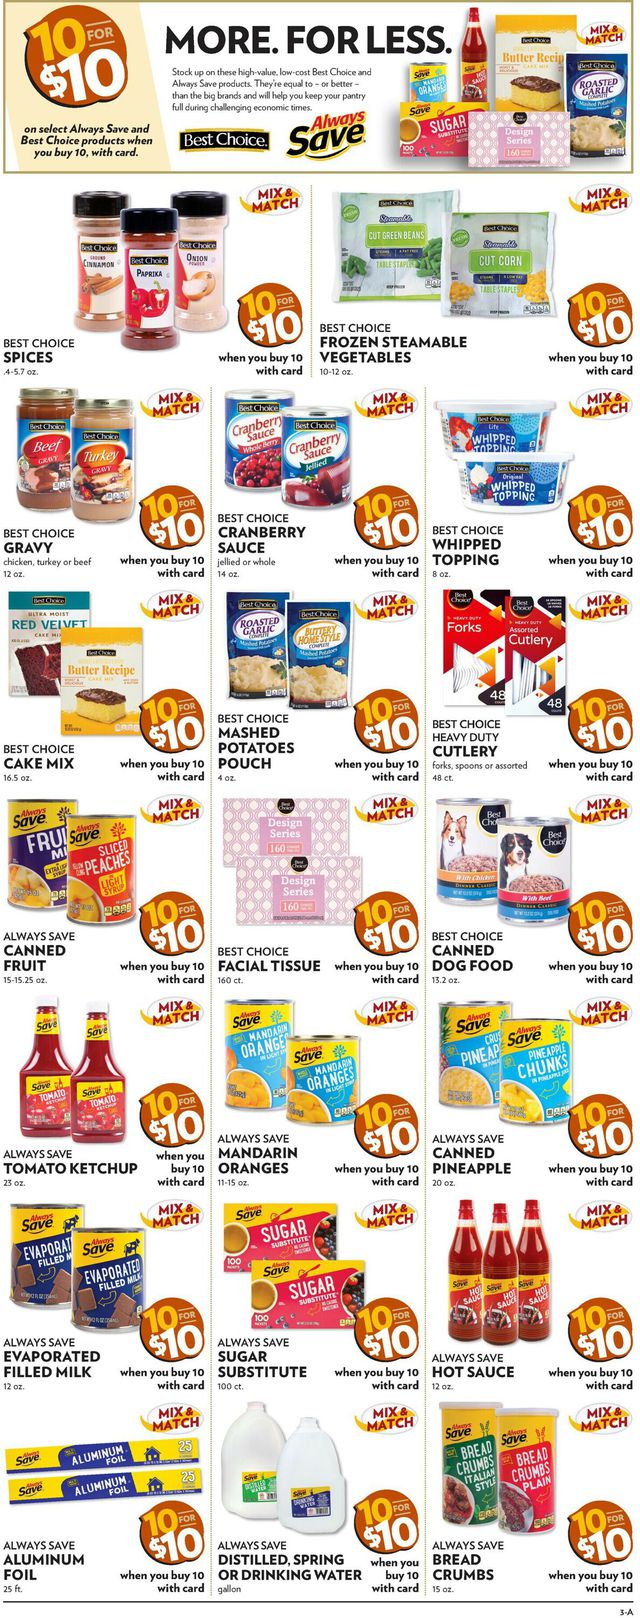 Reasor's Ad from 11/30/2022